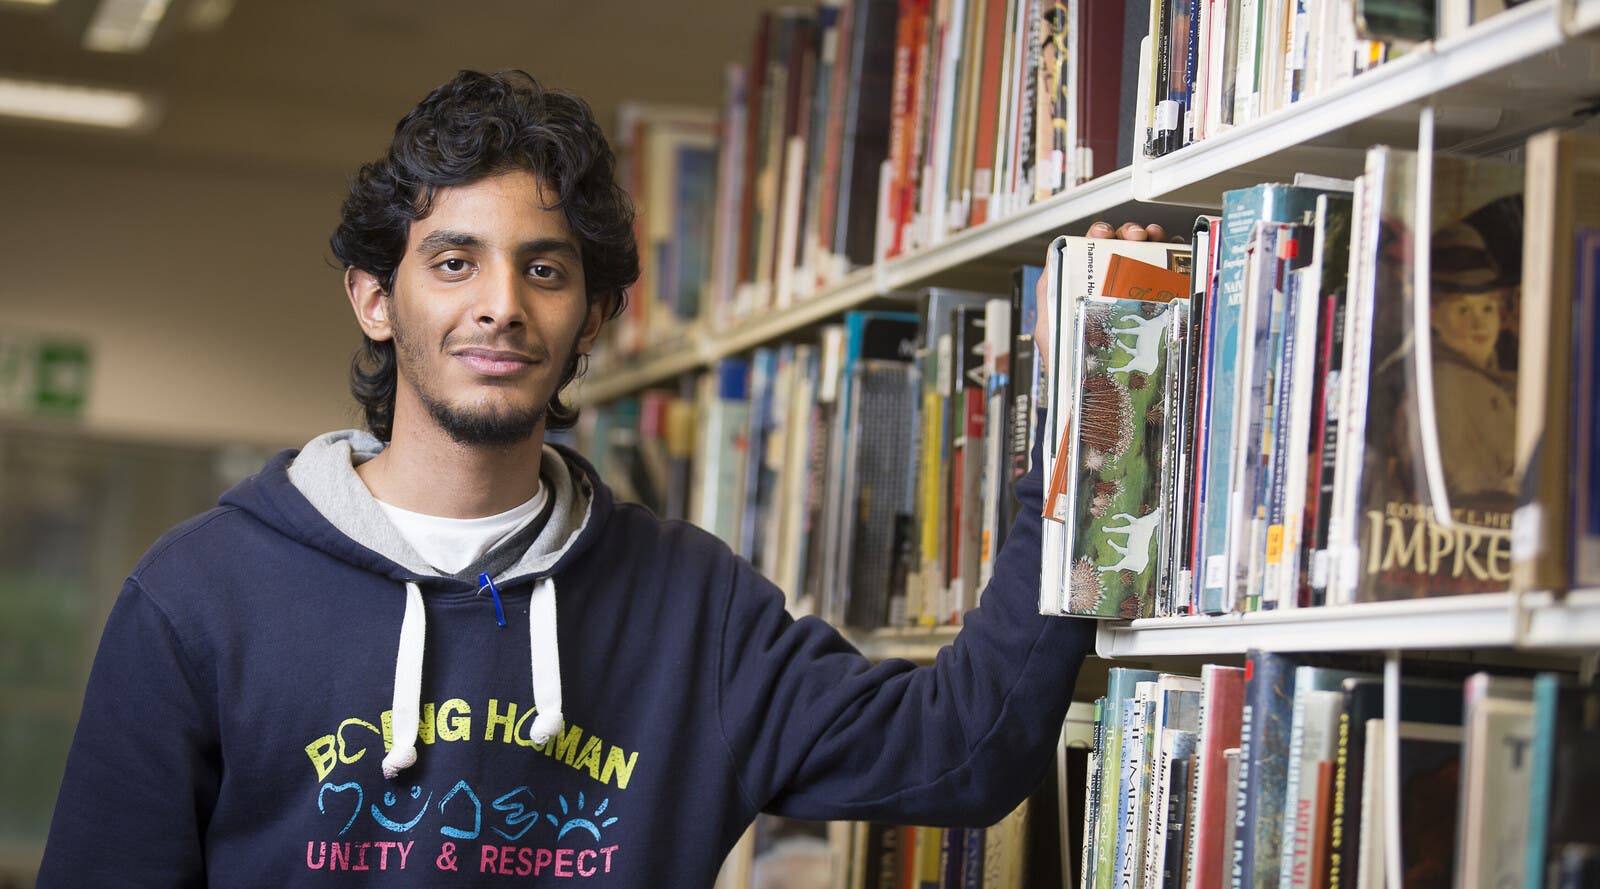 Majed, an international student, in the library.